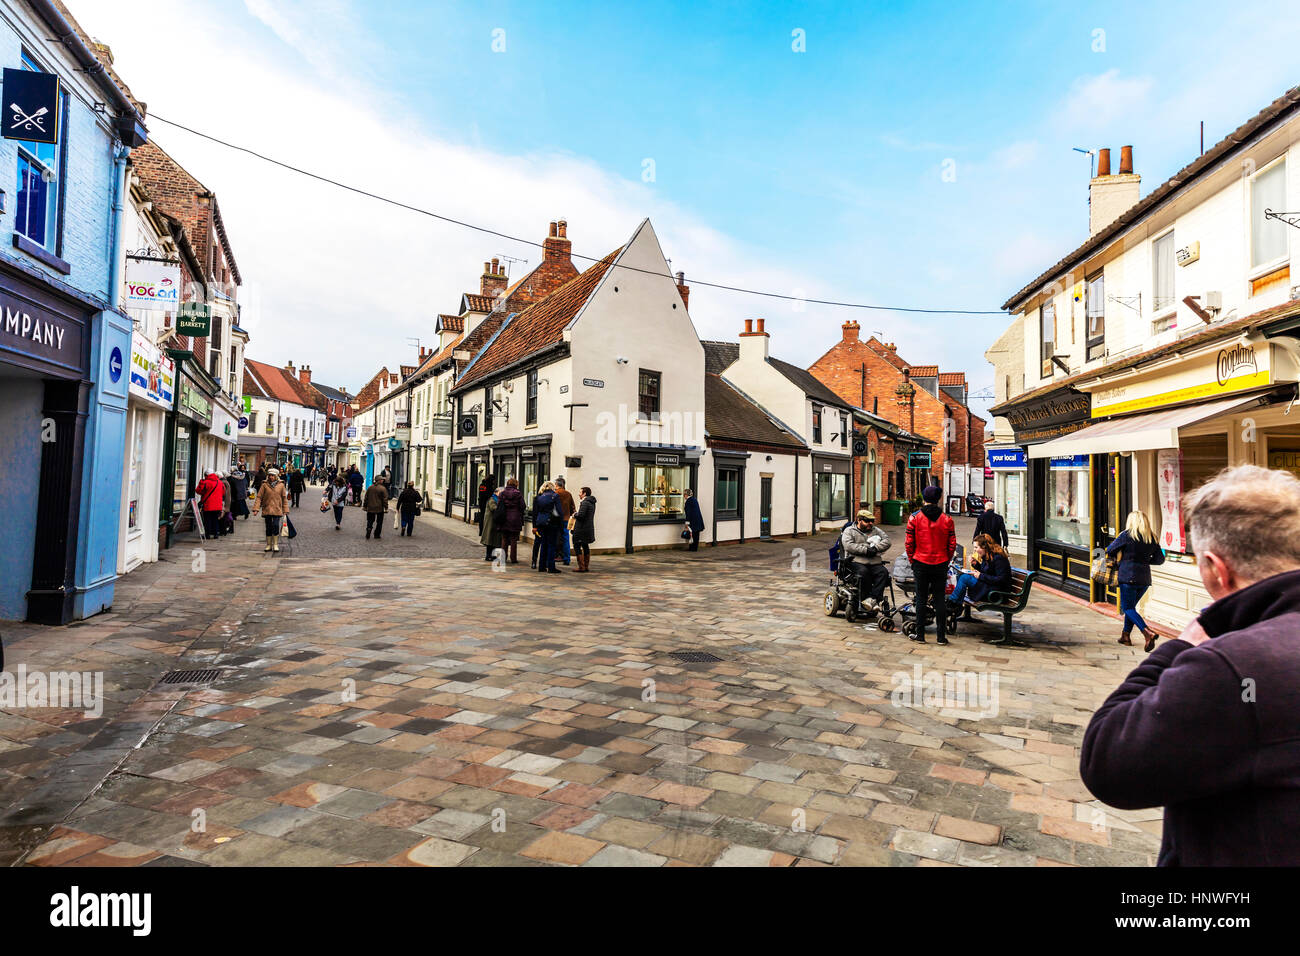 Beverley town centre, center, shops, shoppers, stores outside main street shopping area Beverley Yorkshire UK England Stock Photo